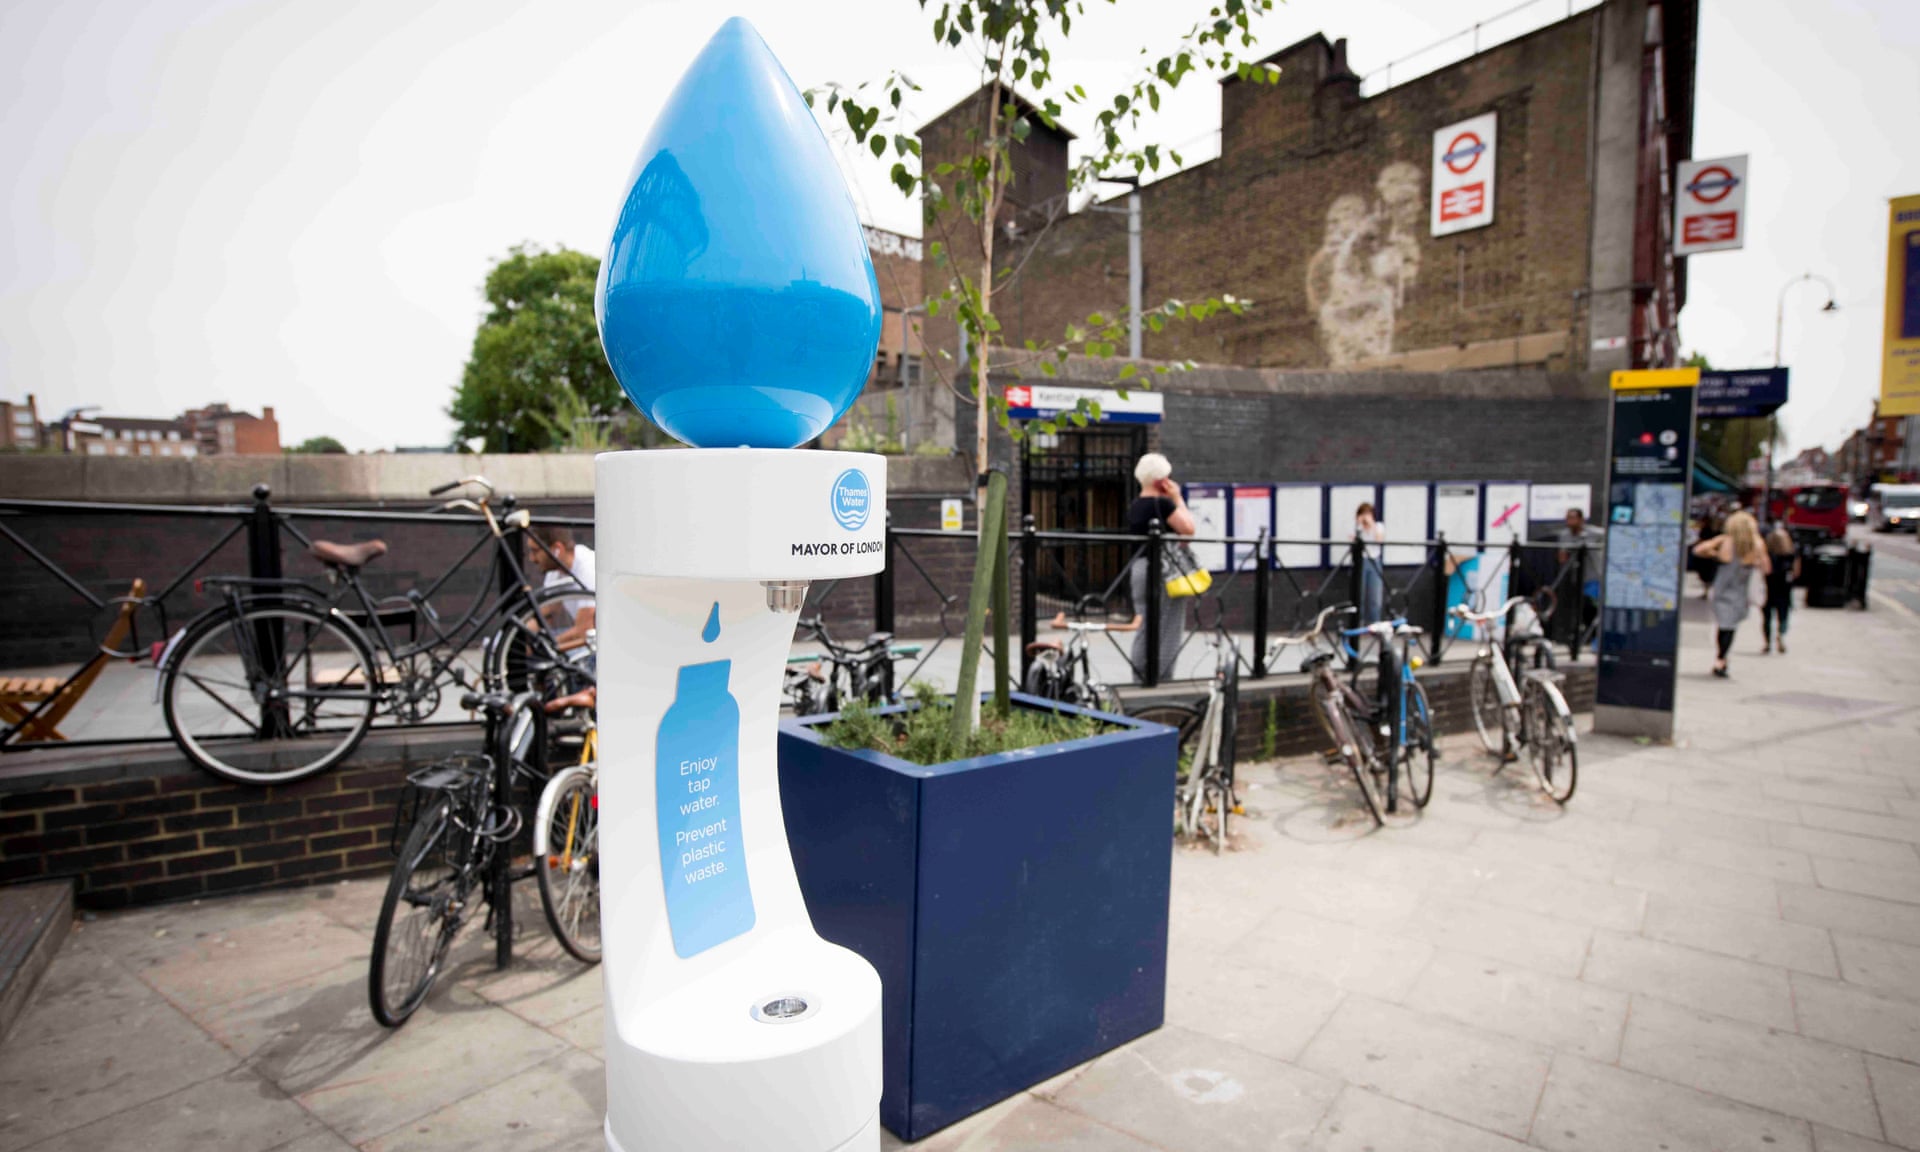 New outdoor drinking fountain and bottle refill station for Thames Water and GLA project